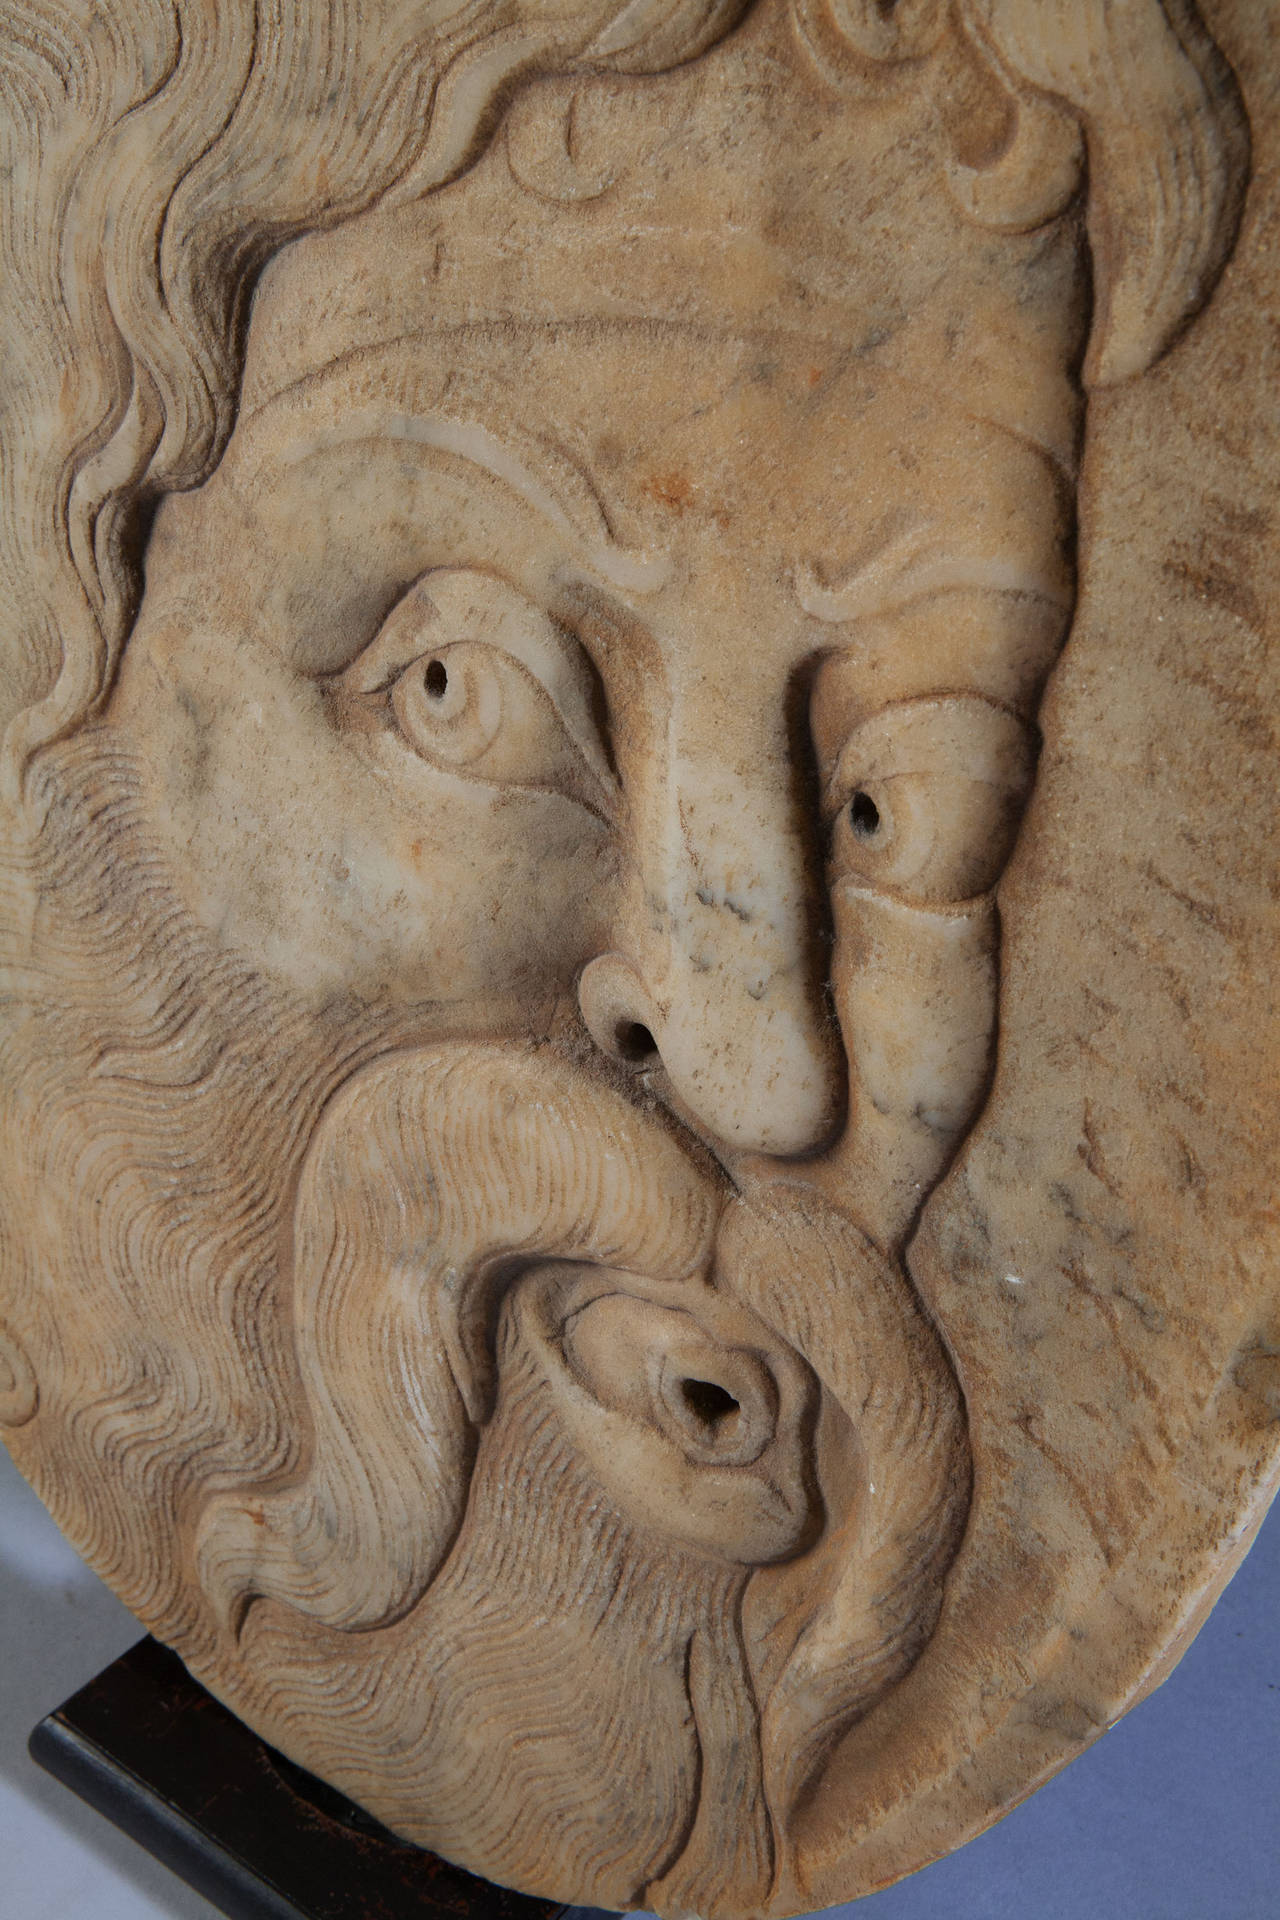 A rare late seventeenth century carrera white marble sculpture of a bearded Turk, dramatically carved in low relief, originally mounted on a wall as a fountain head.